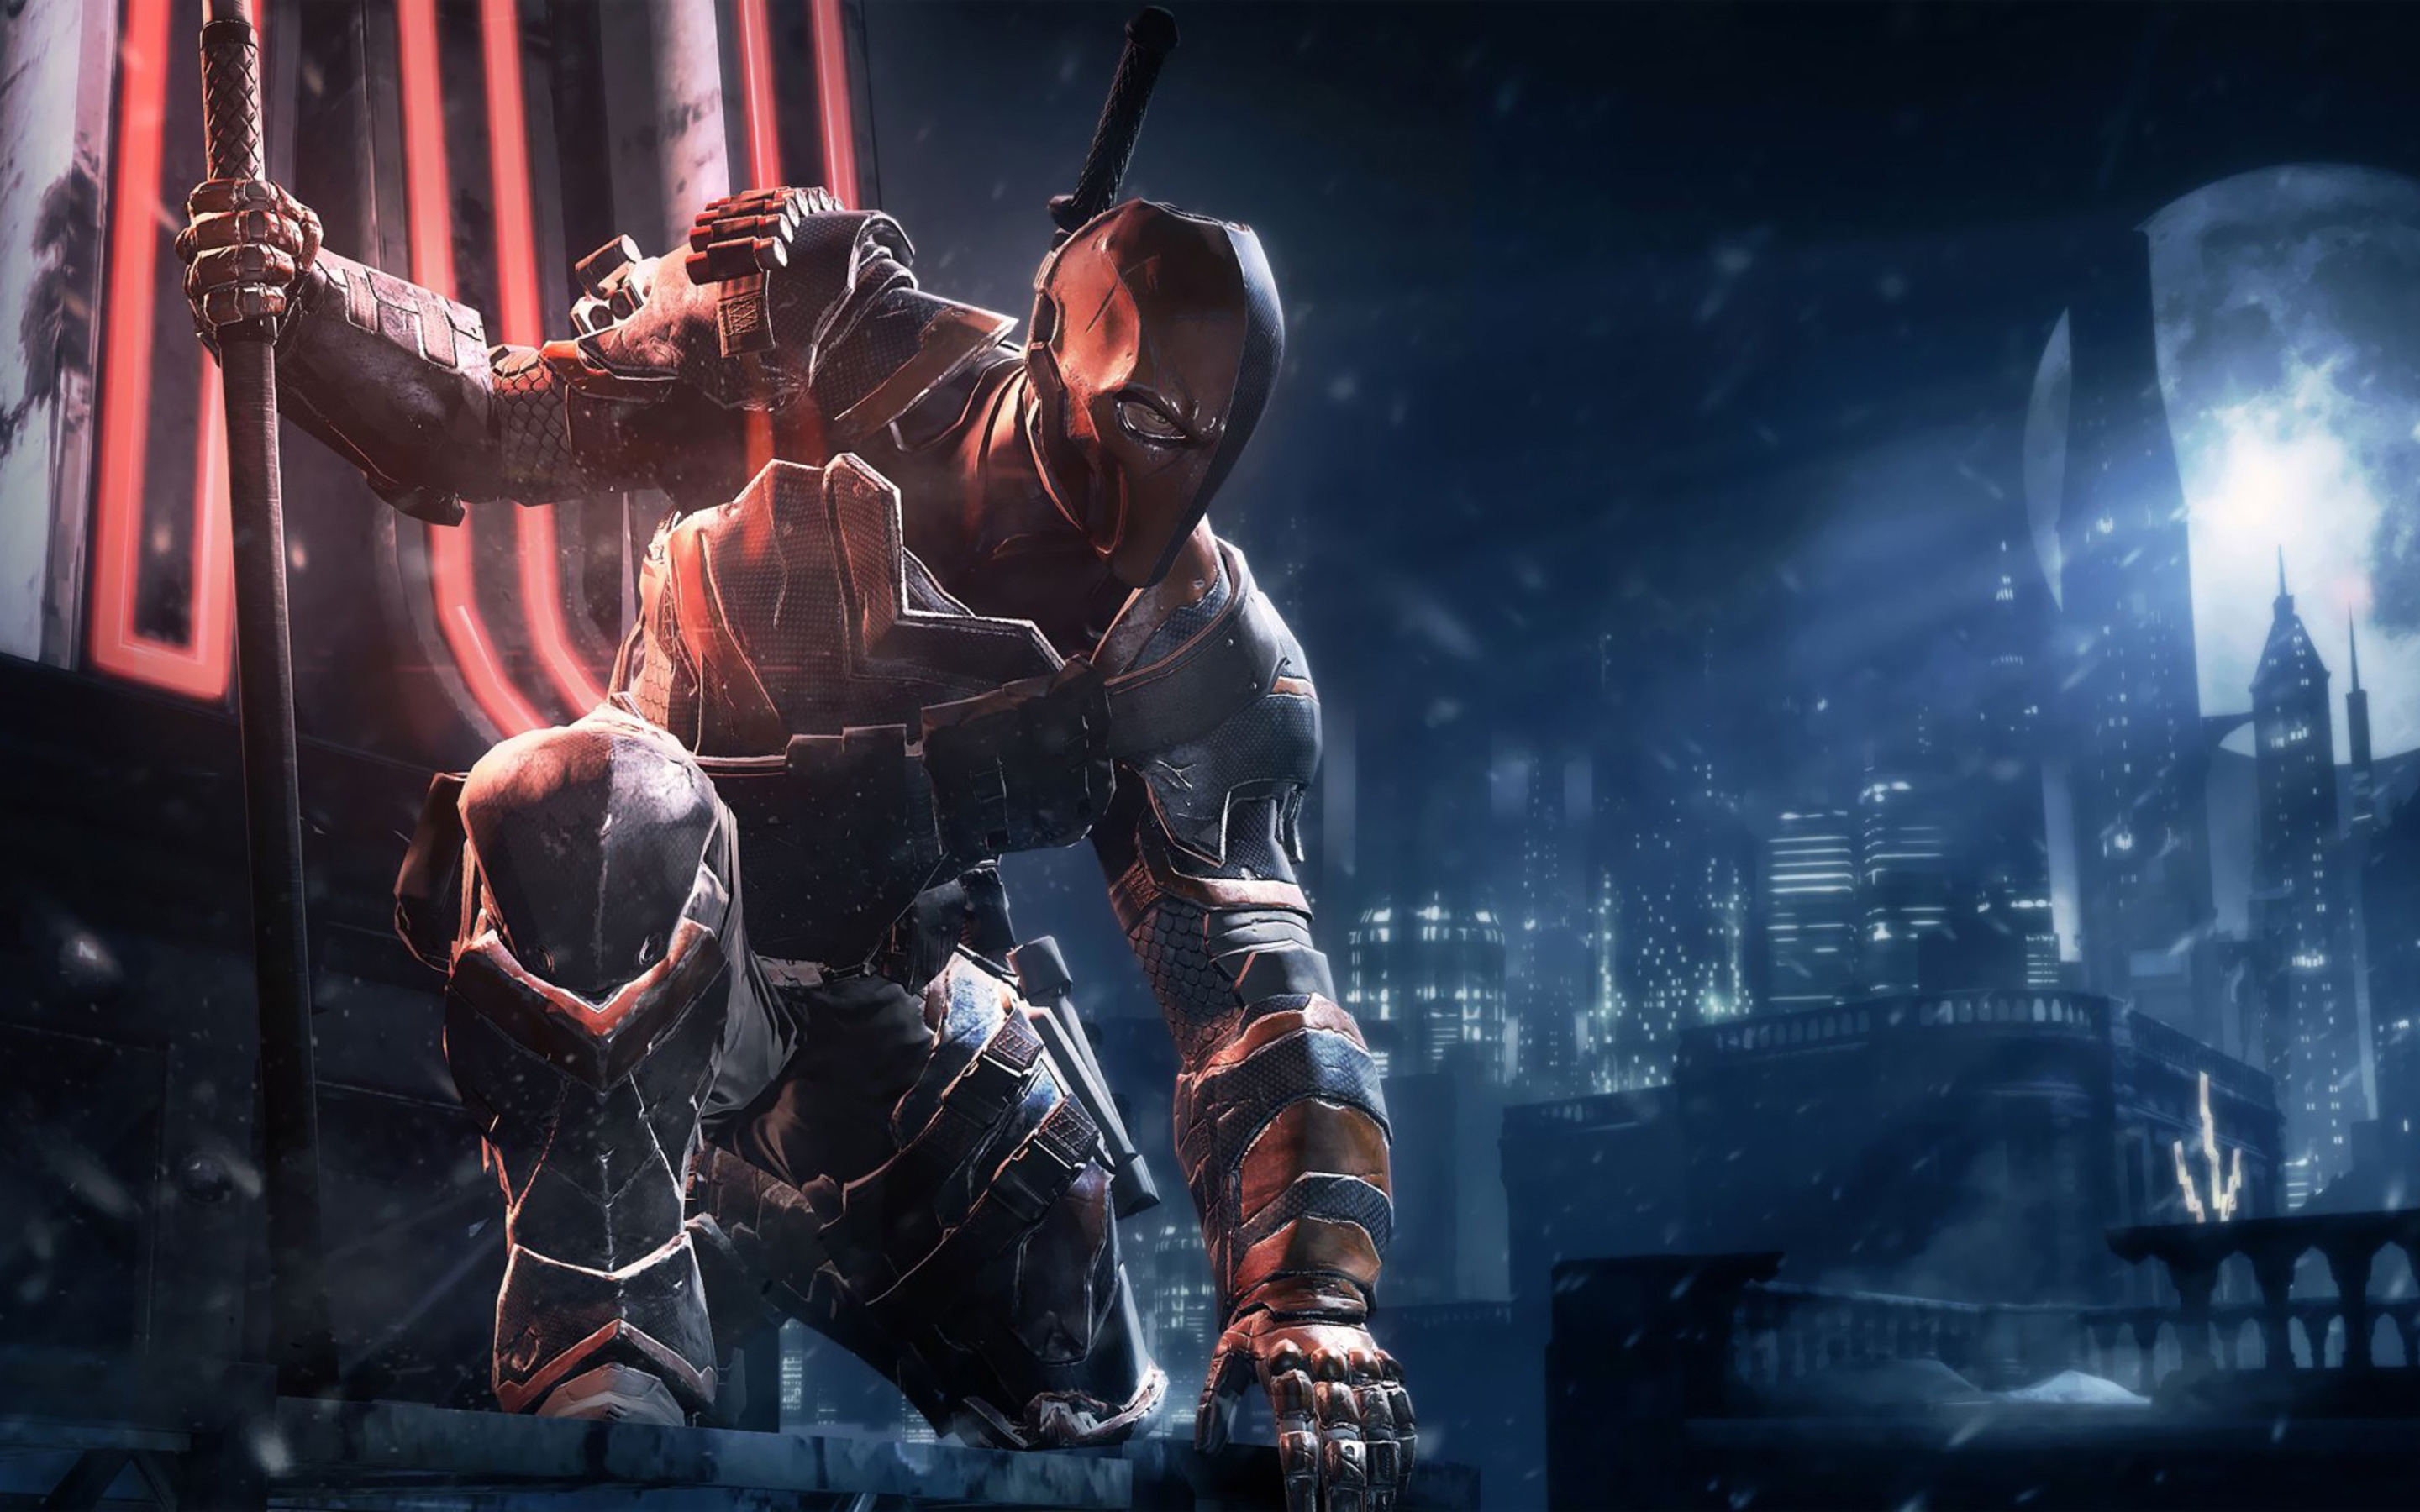 Deathstroke for 2880 x 1800 Retina Display resolution